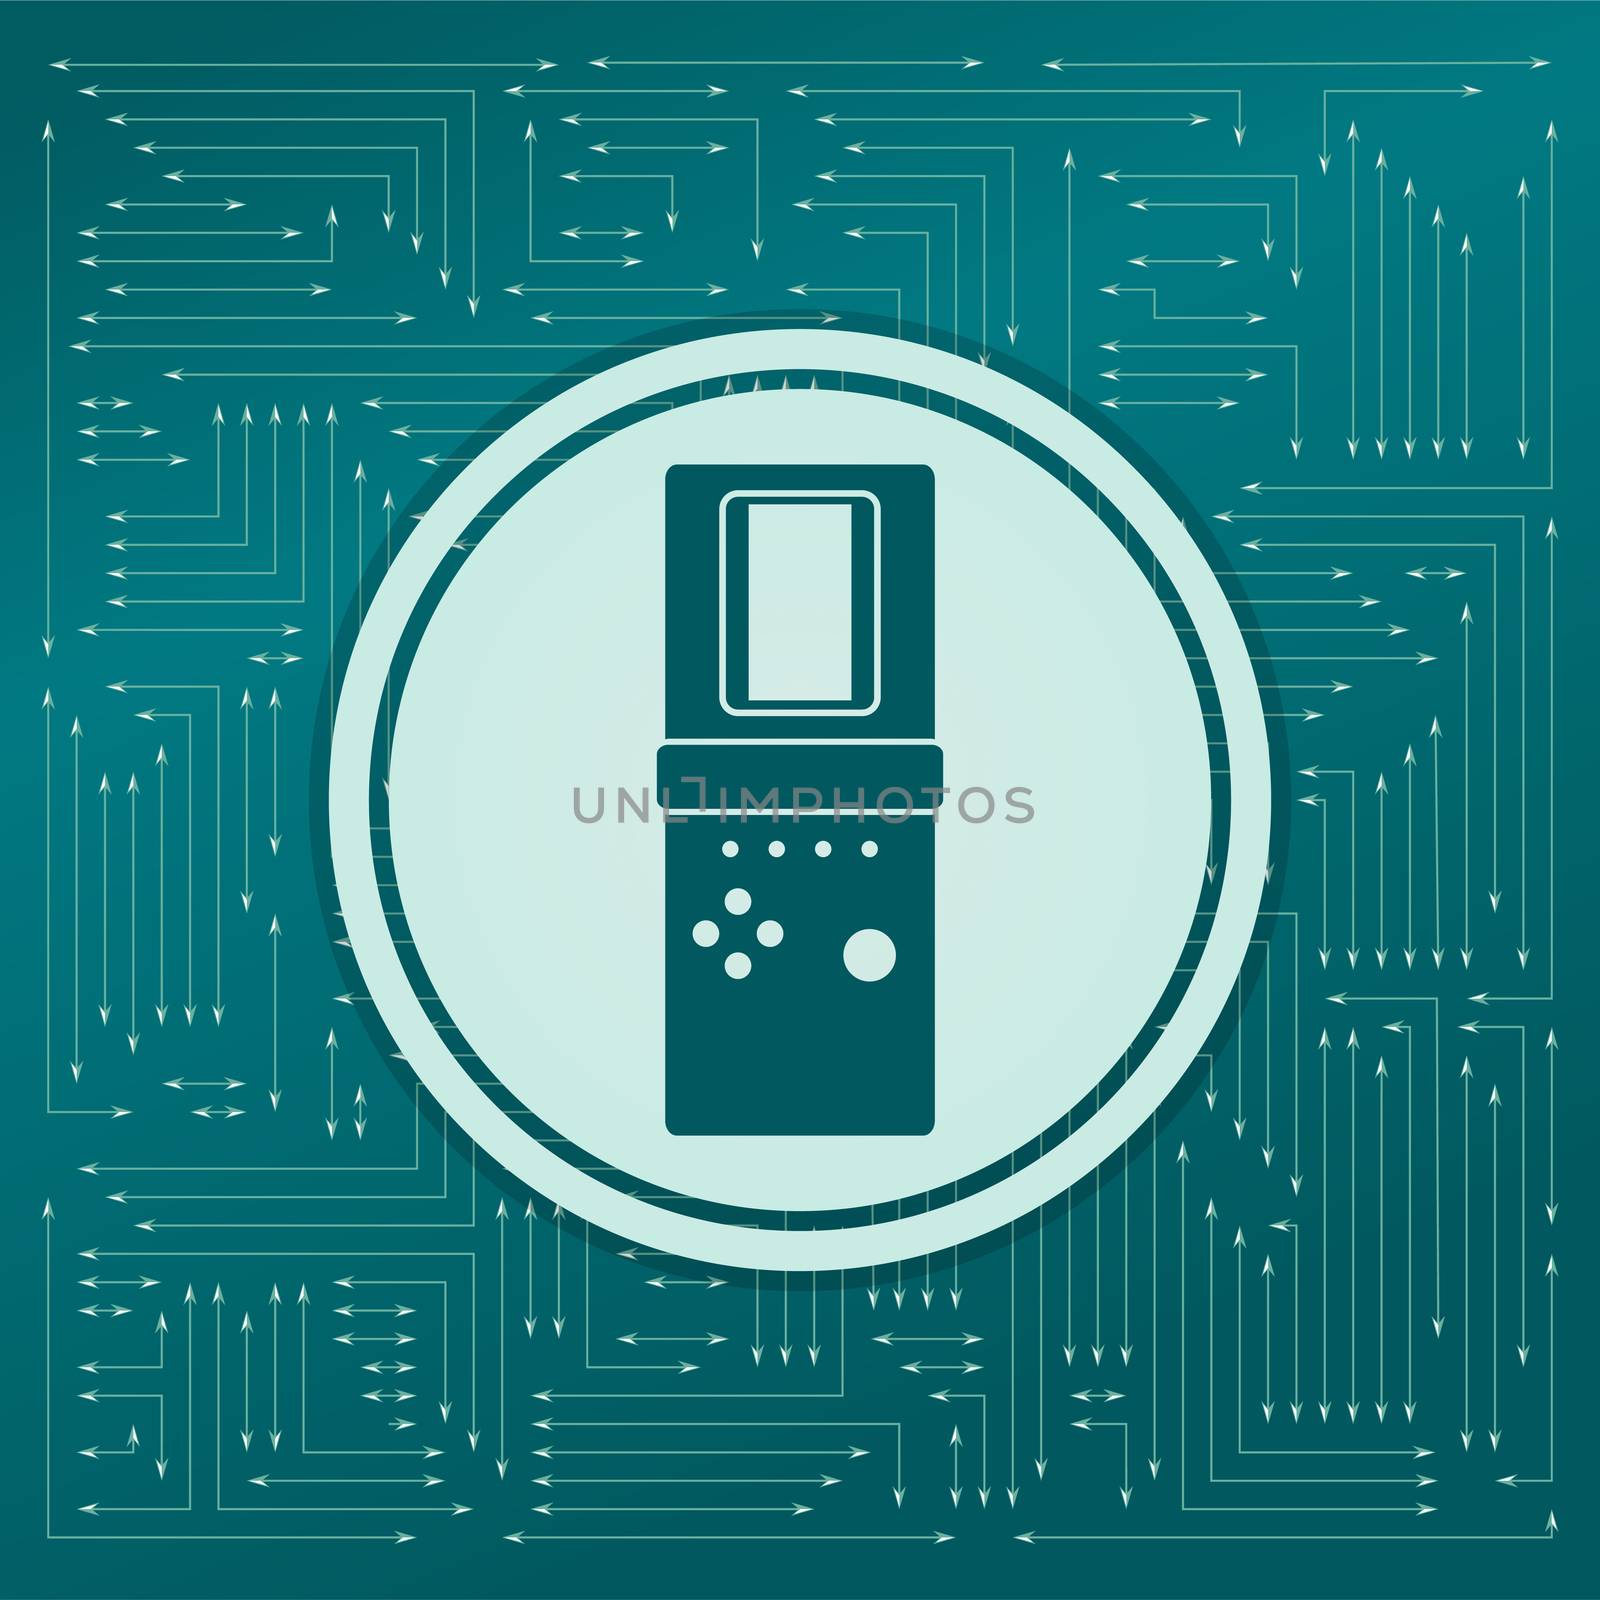 Tetris icon on a green background, with arrows in different directions. It appears on the electronic board. illustration